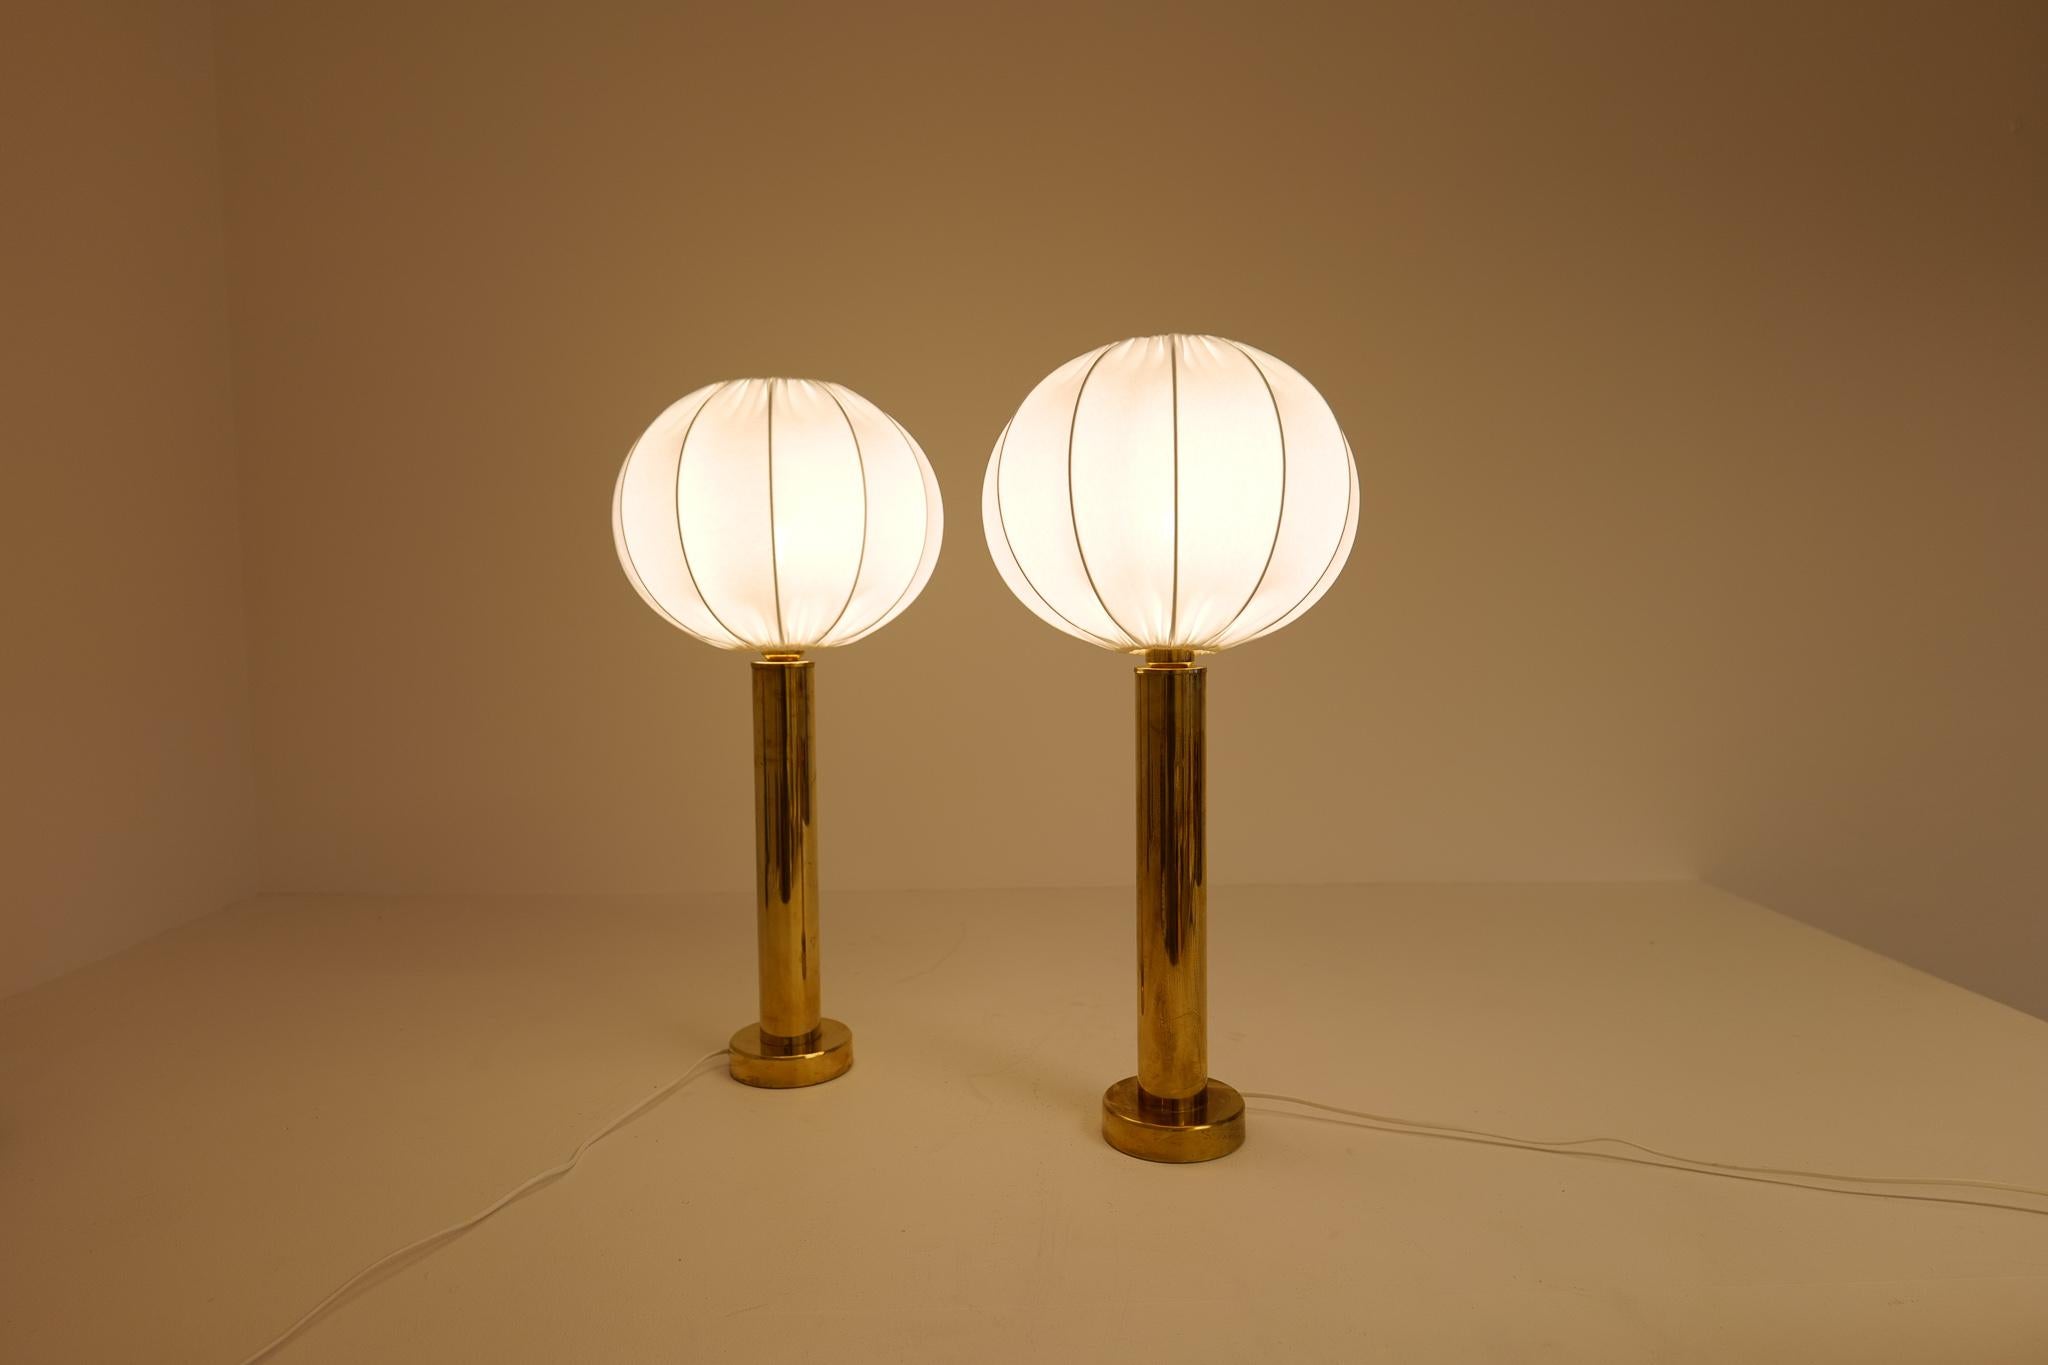 Midcentury Pair of Brass Table Lamps by Kosta Elarmatur, Sweden, 1960s For Sale 8